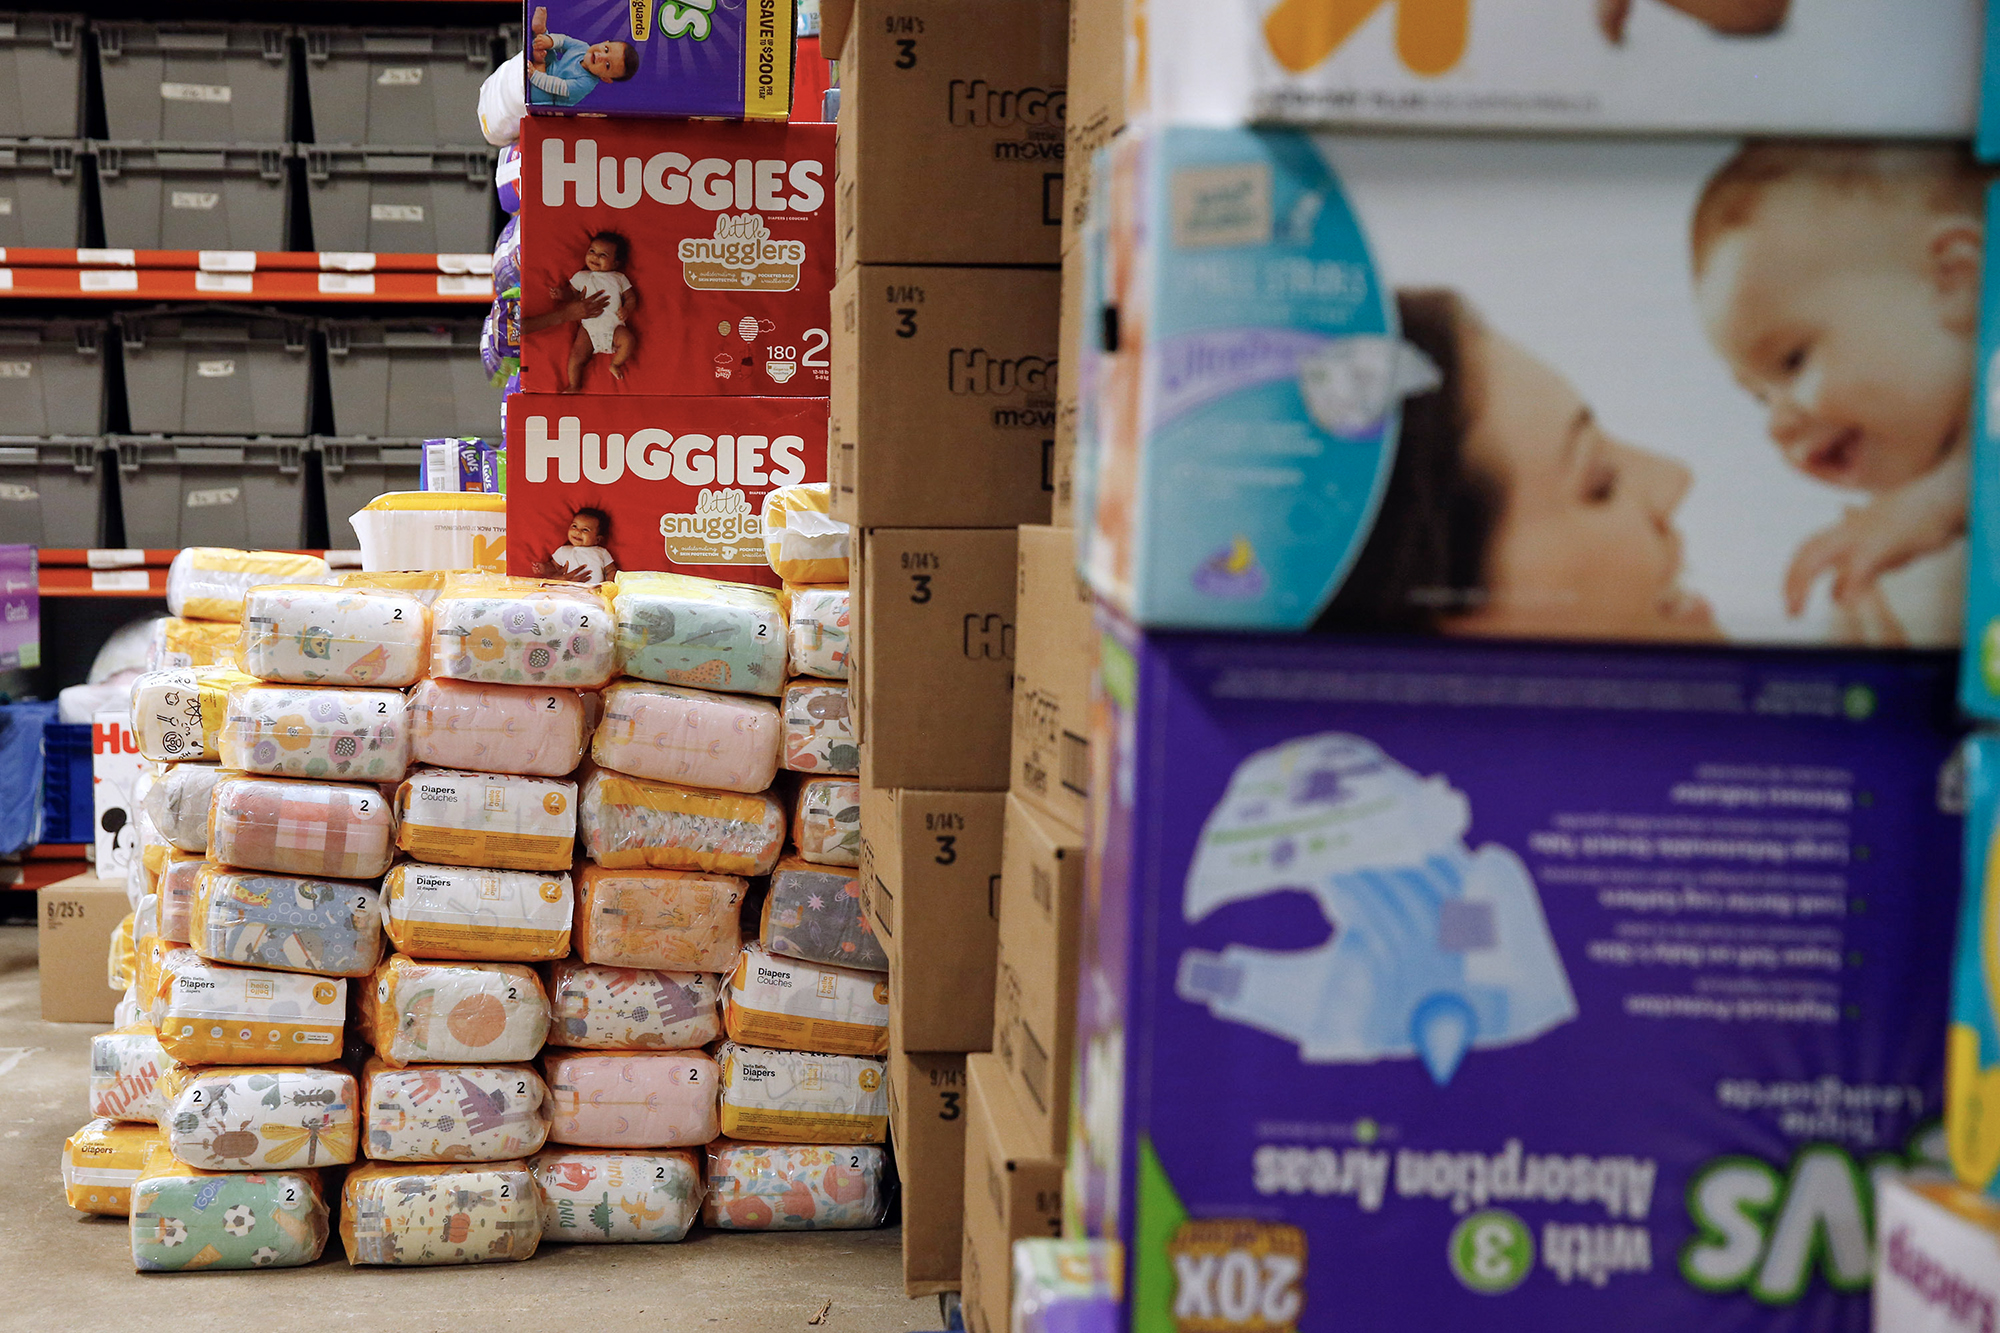 Diapers are stored in the basement at the Eastern Iowa Diaper Bank in Cedar Rapids, Iowa, on Dec. 14, 2020. Photo by Liz Martin, The Gazette via AP Photo